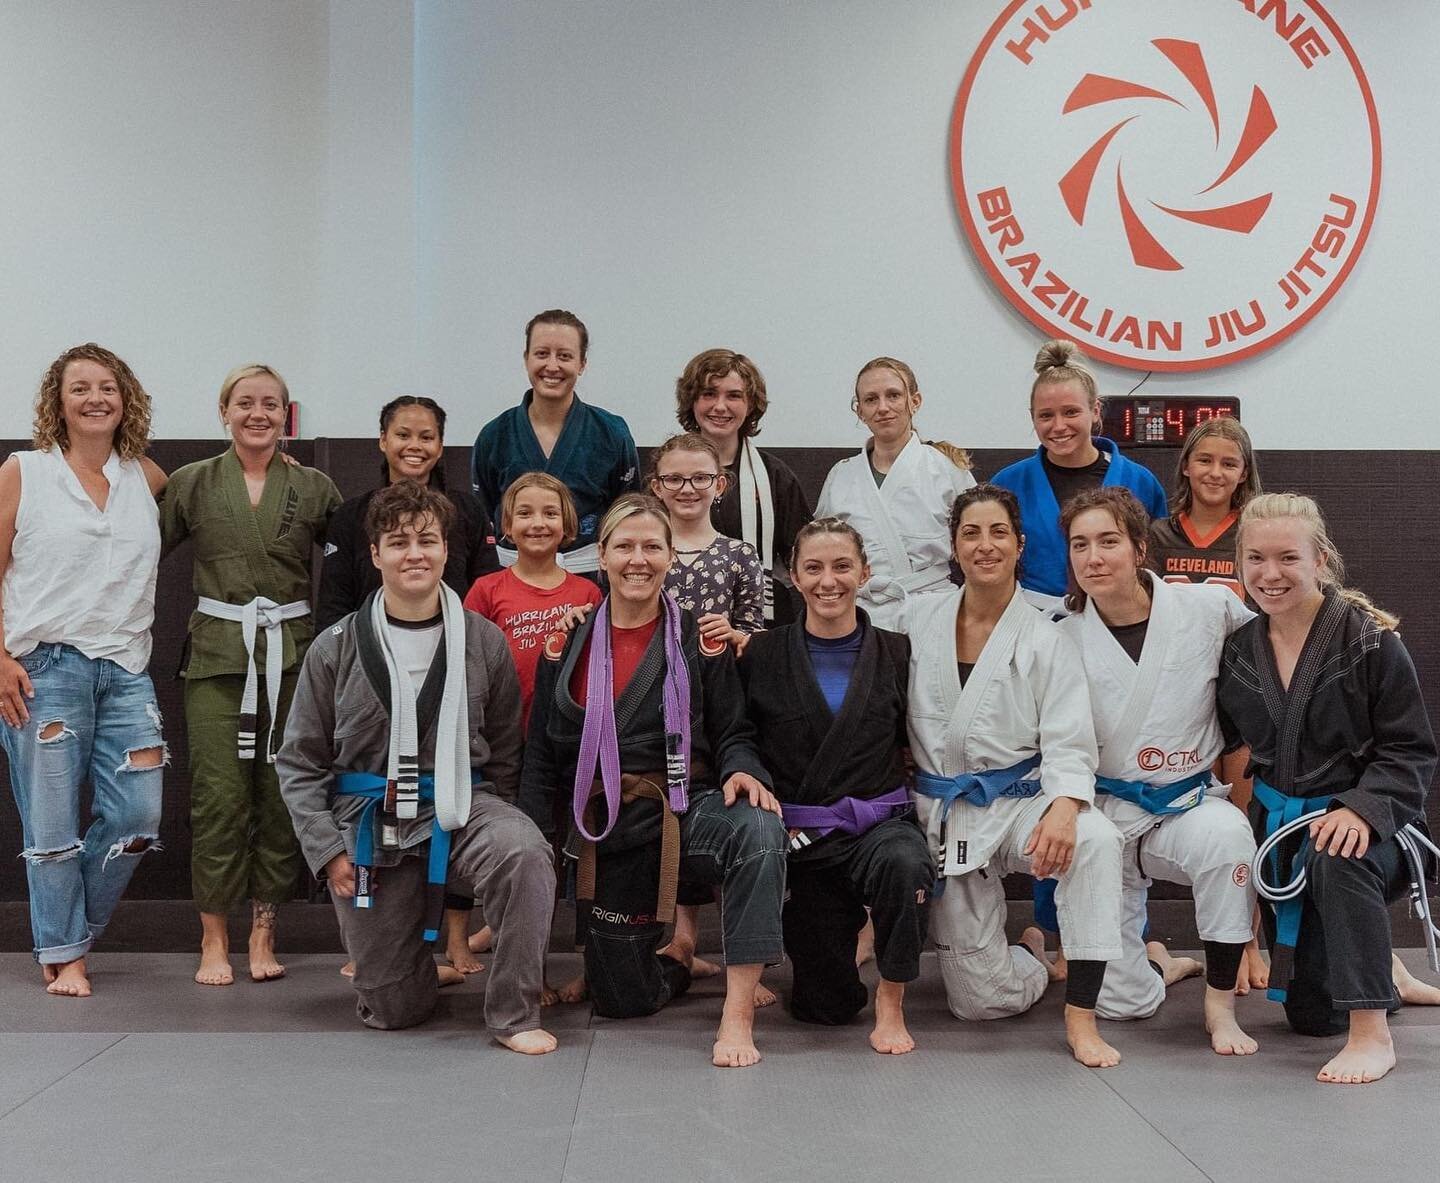 Women&rsquo;s team representing with 4 new belts. Keep up the great work, see you on the mats! Join us on Tuesdays and Saturdays, we welcome you! #jiujitsu #bjj #promotions #hurricanejj #competition #selfdefense #cle #cleveland #westpark